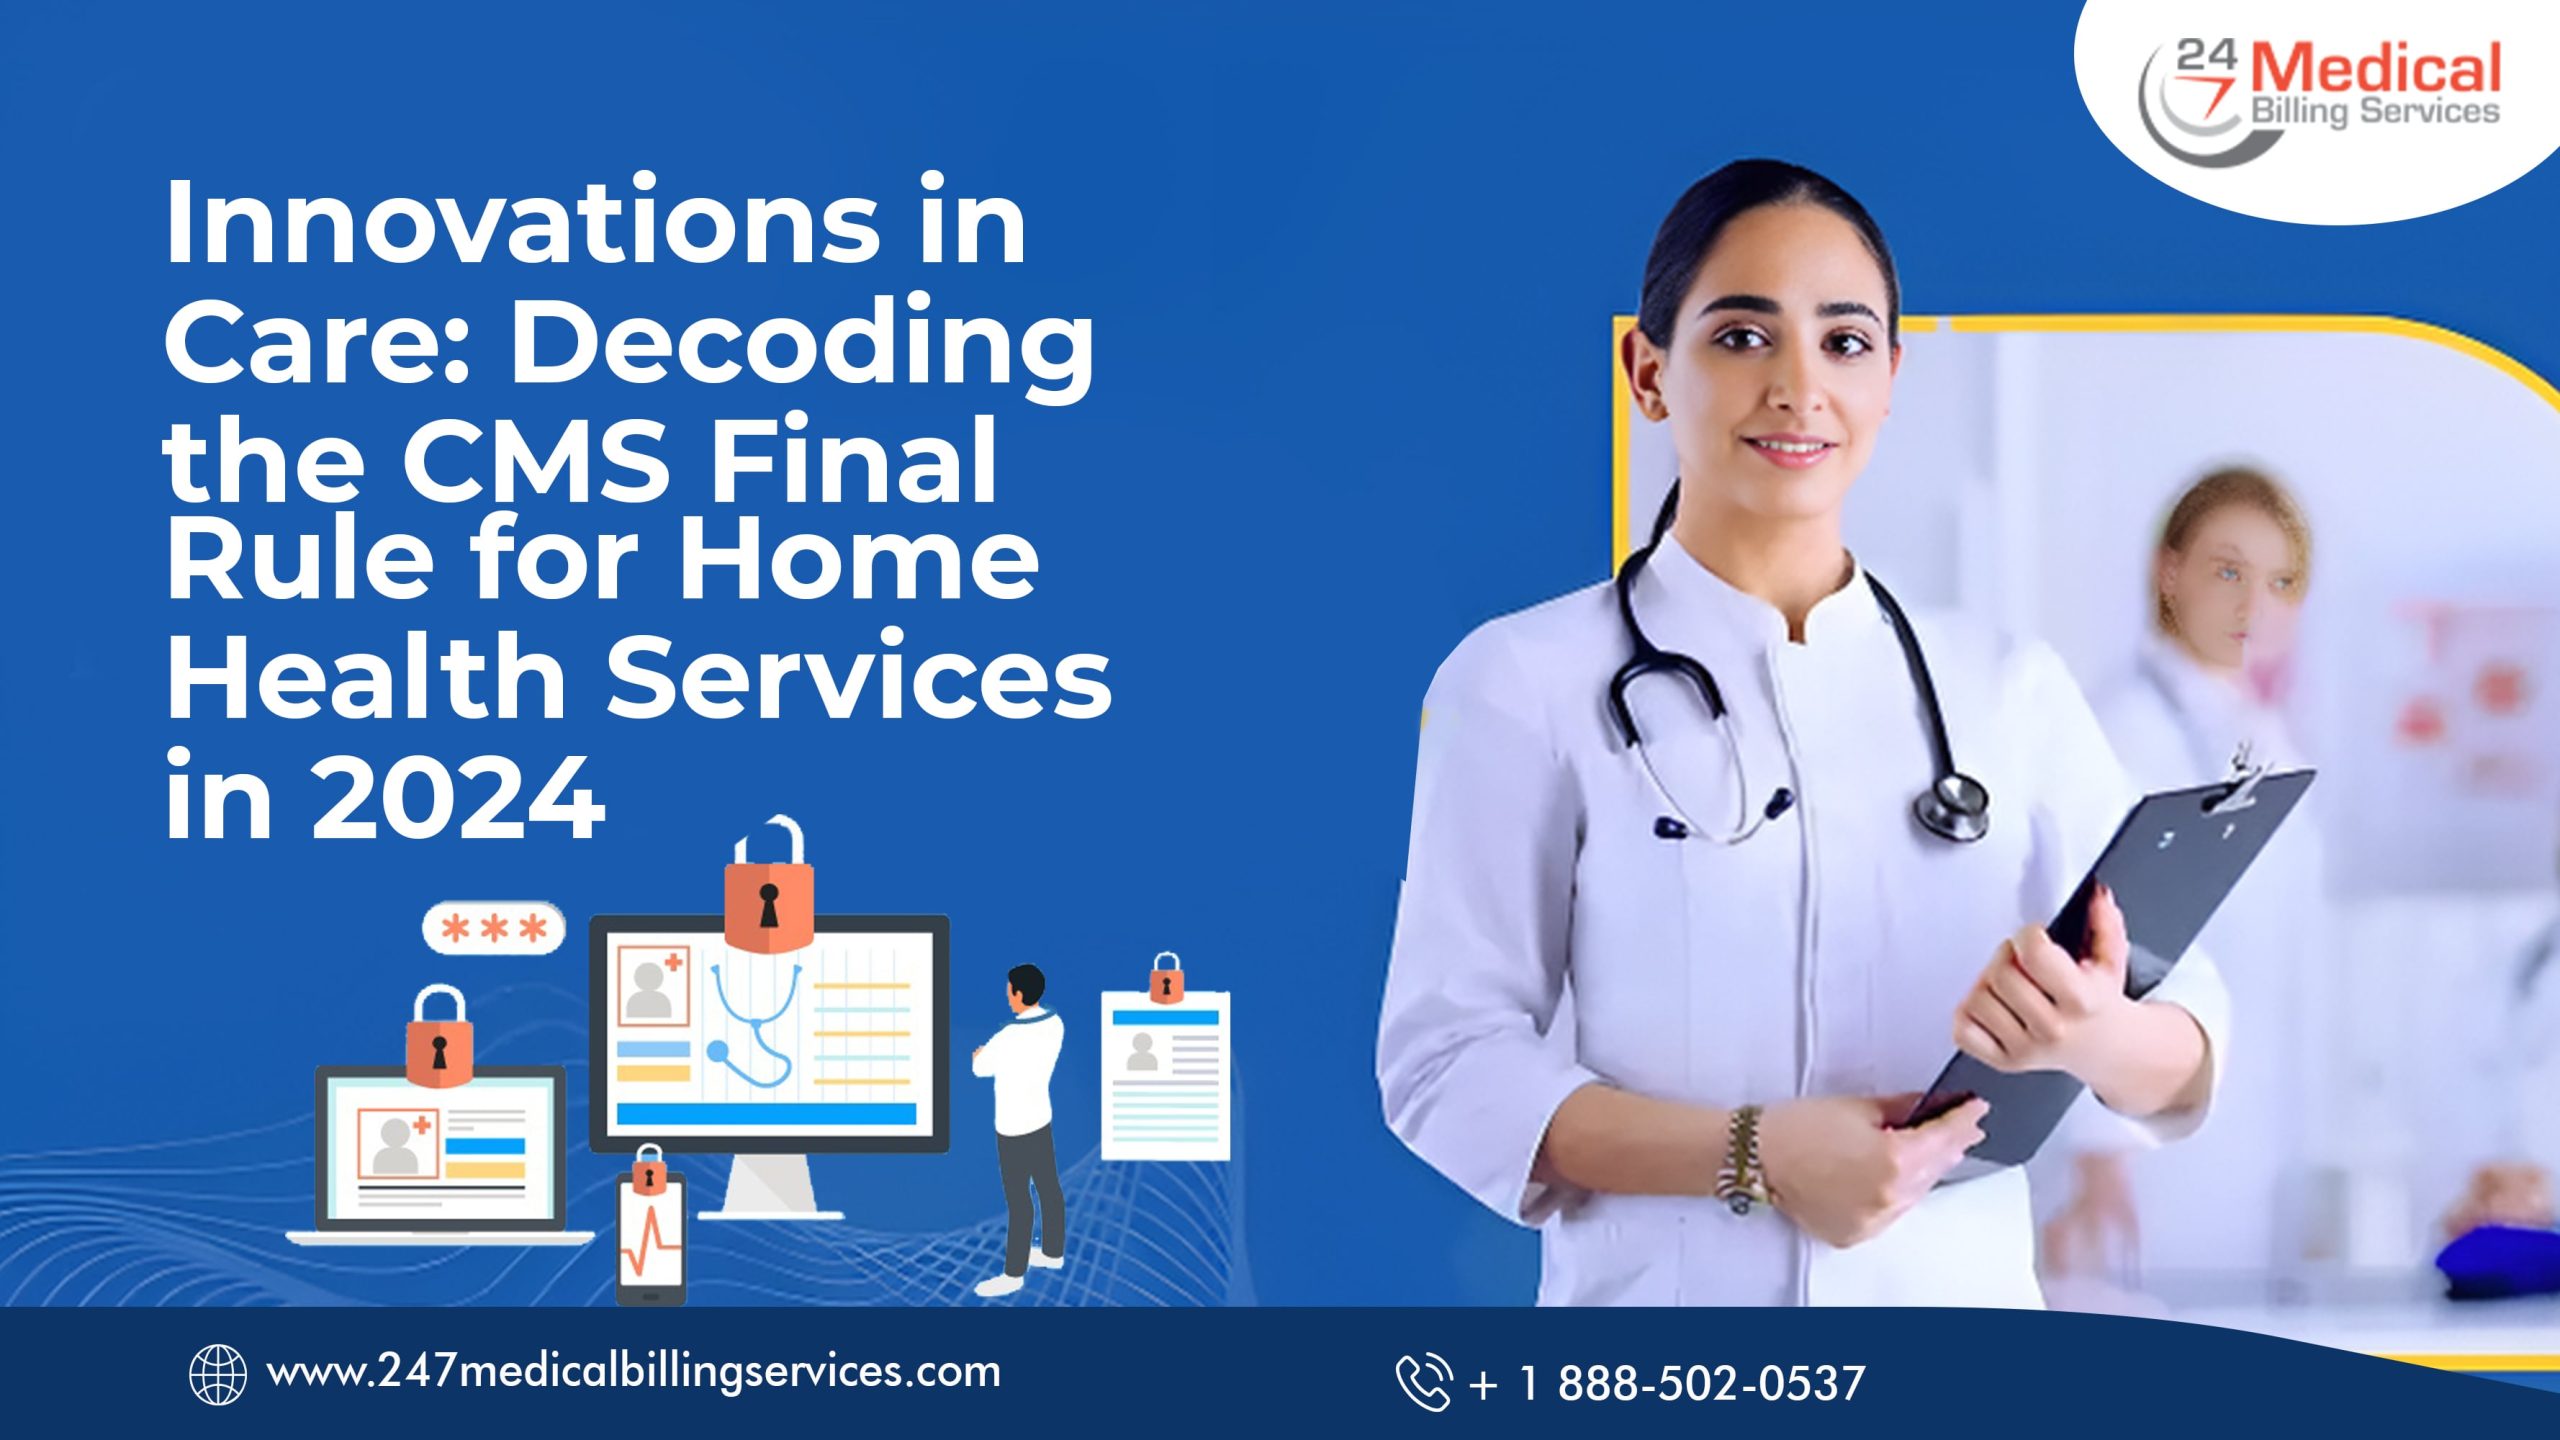  Innovations in Care: Decoding the CMS Final Rule for Home Health Services in 2024